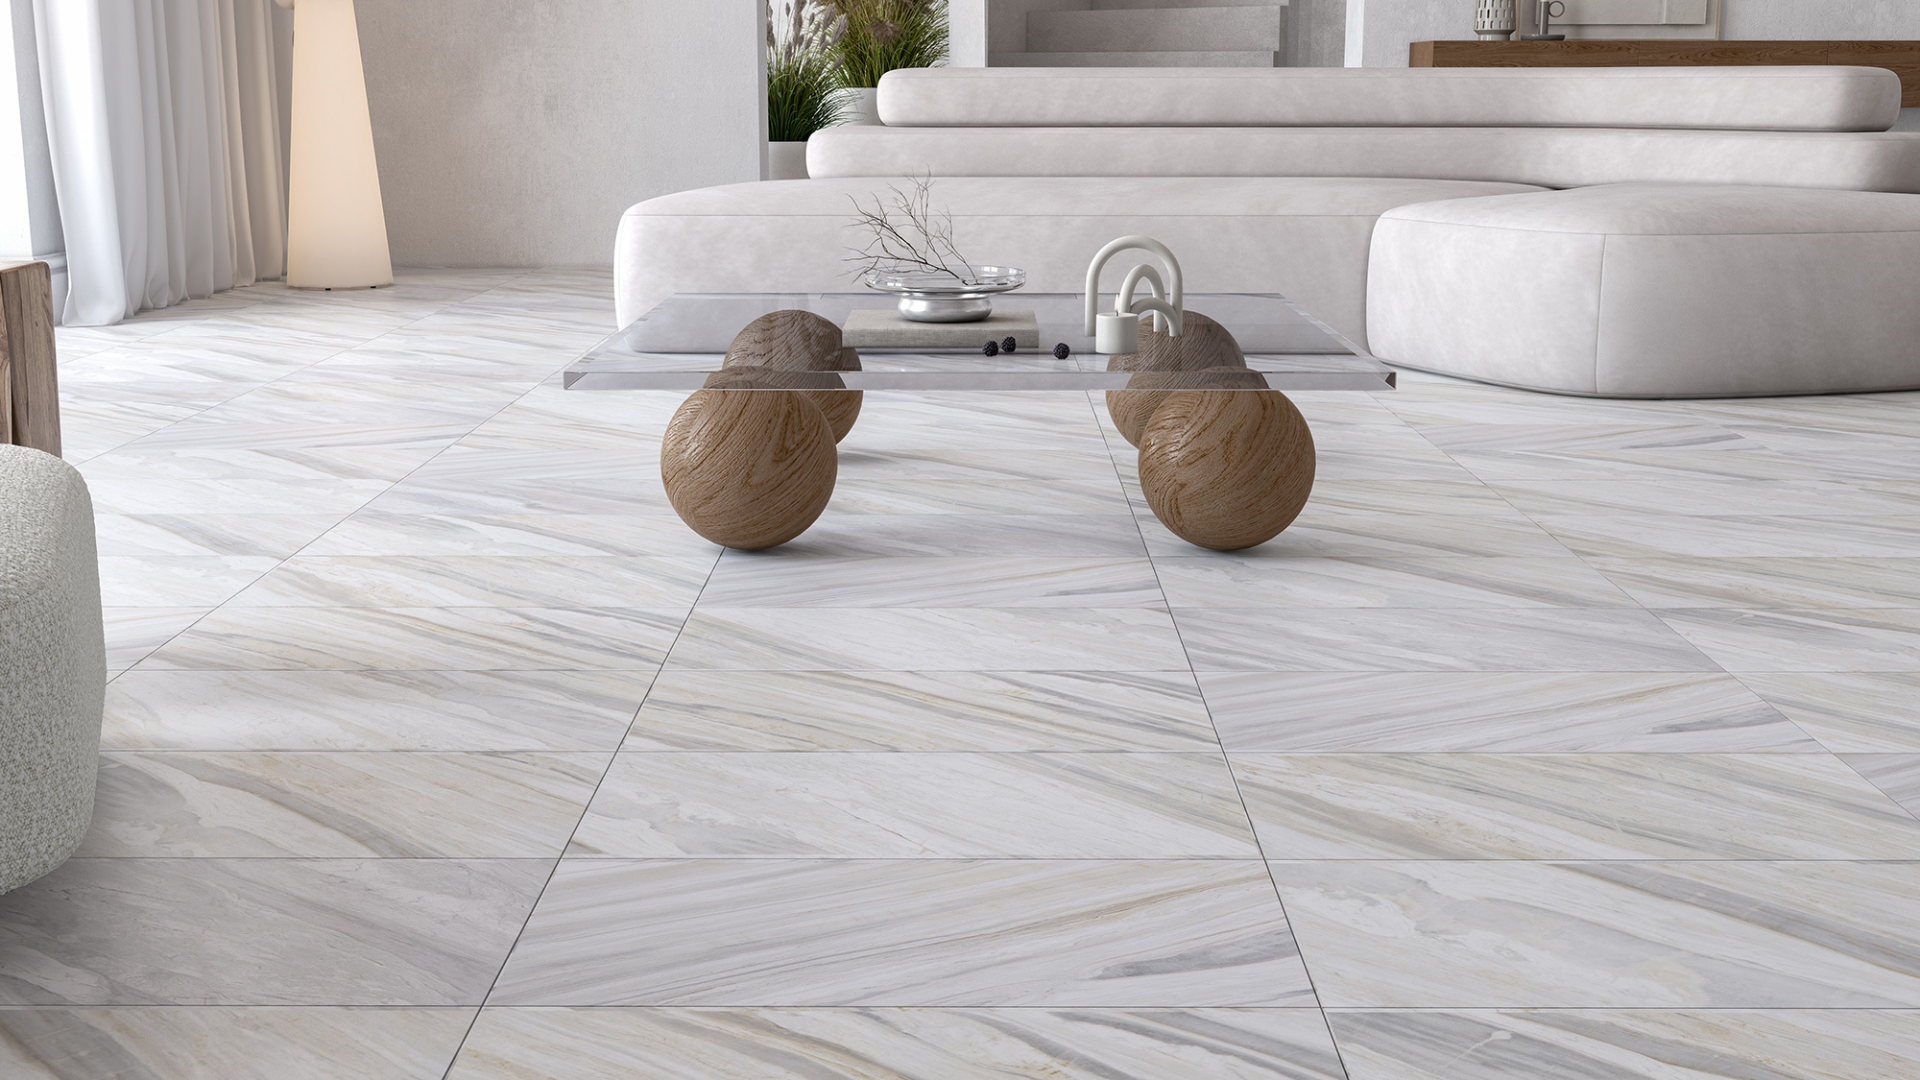 Rendering of a living room flooring, with white marble and light beige and grey veins, a perfect example of natural stone vein matching